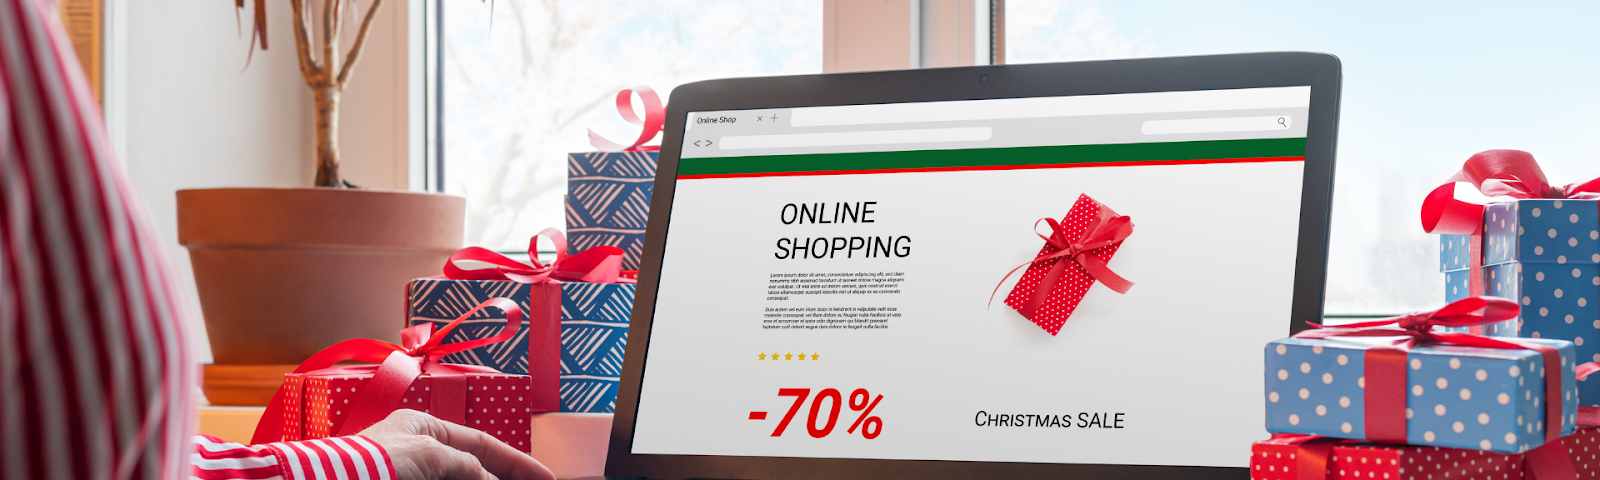 Ecommerce holiday retail sales 2021 christmas shopping